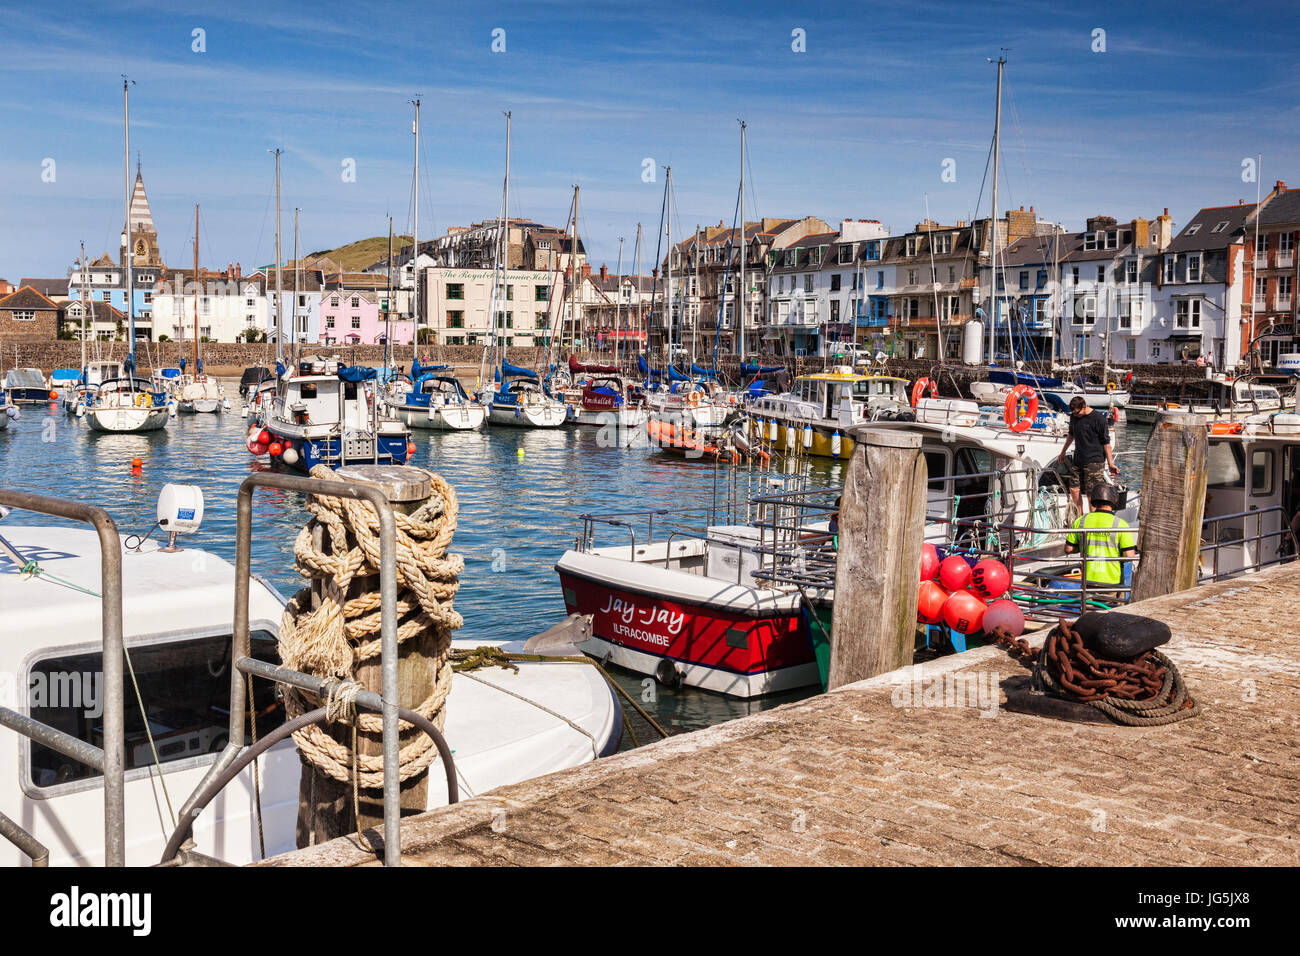 14 June 2017: Ilfracombe, Devon, England, UK - The busy harbour and quay on a warm summer day. Stock Photo